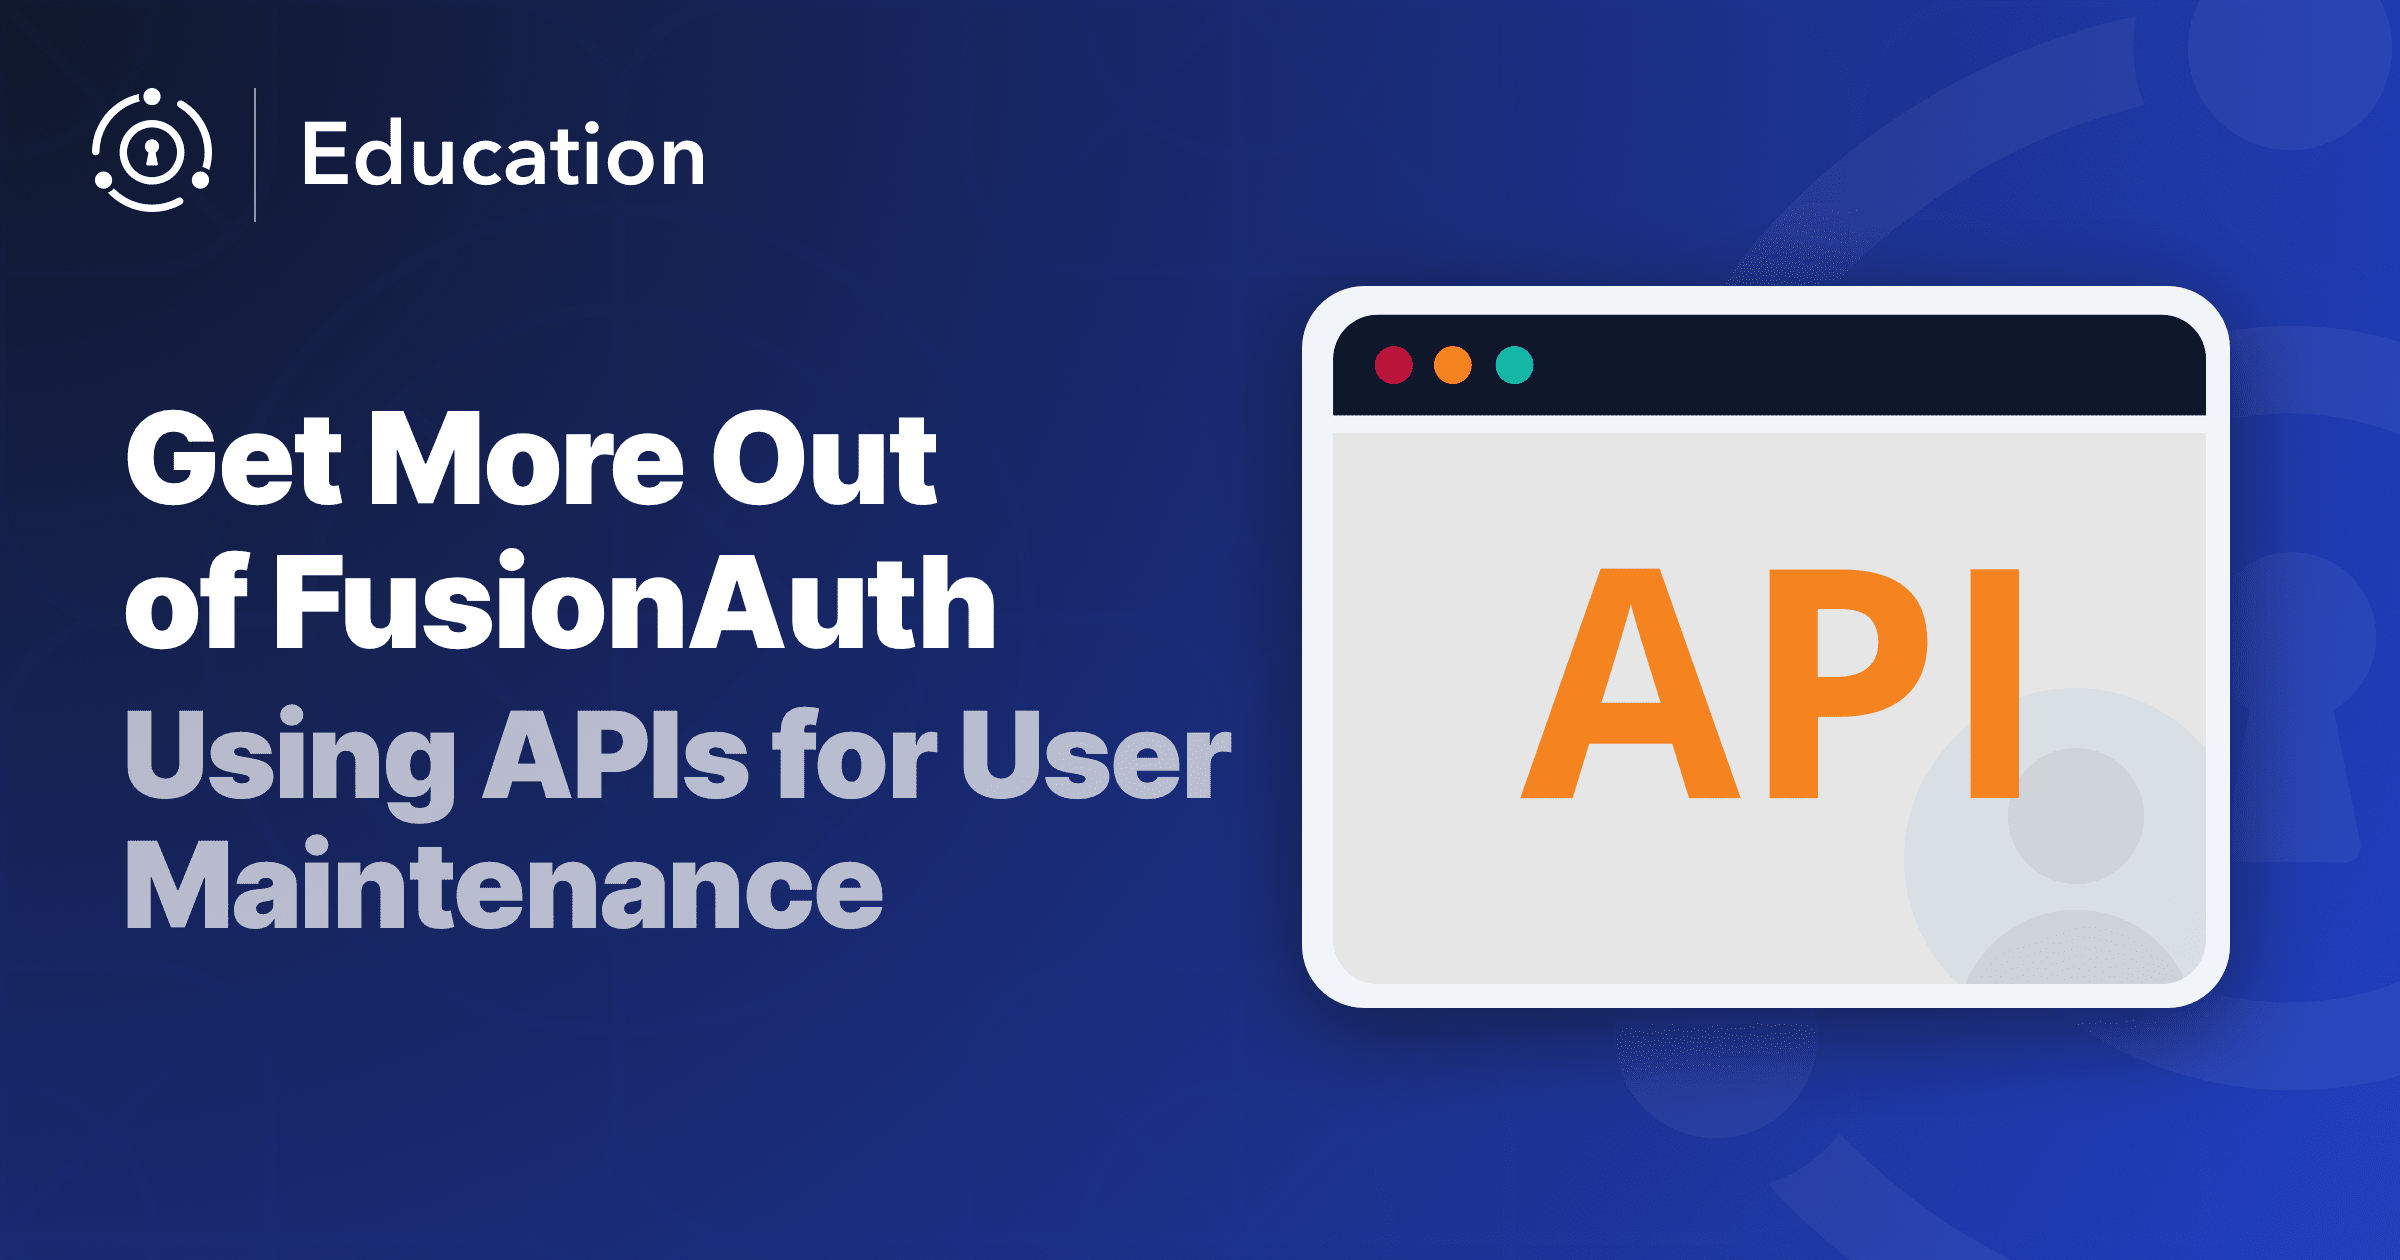 Get More Value Out of FusionAuth Using the APIs for User Maintenance